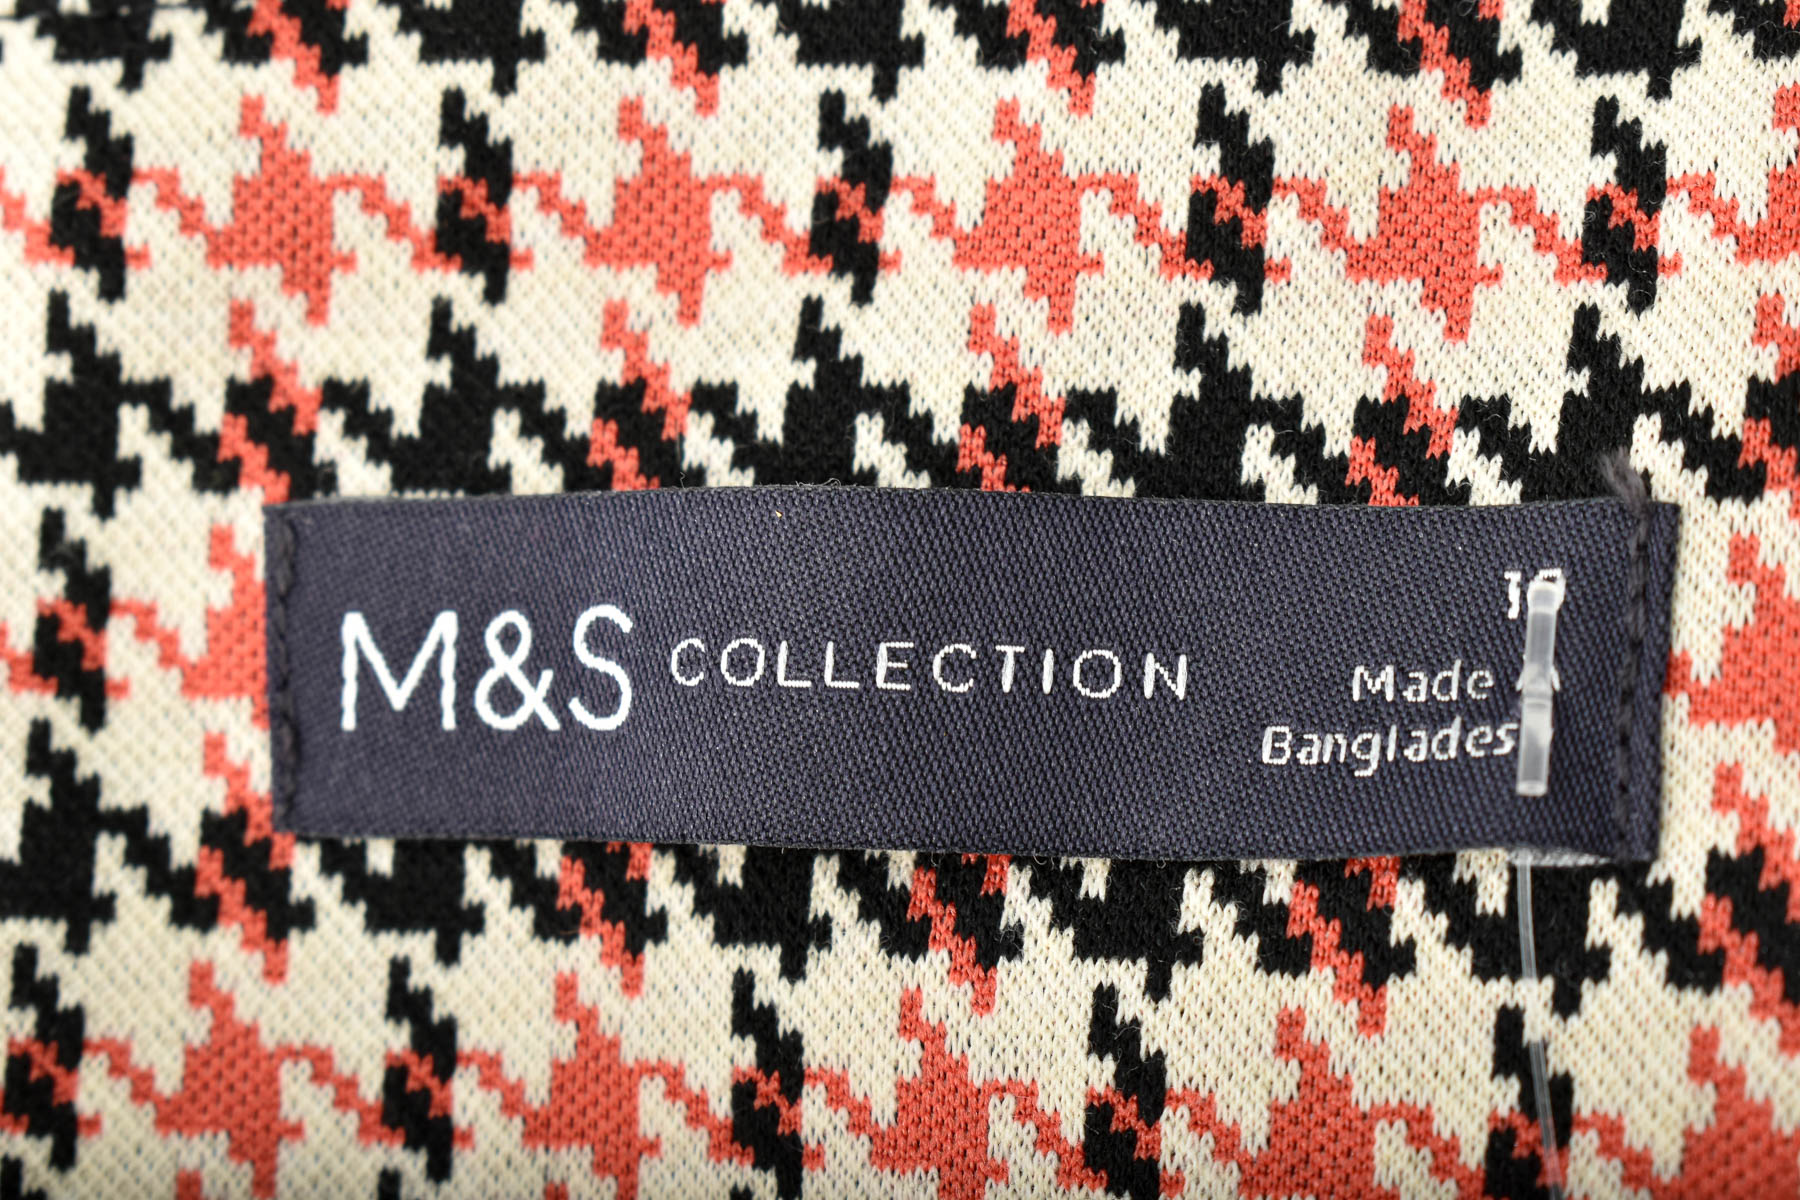 Dress - M&S COLLECTION - 2